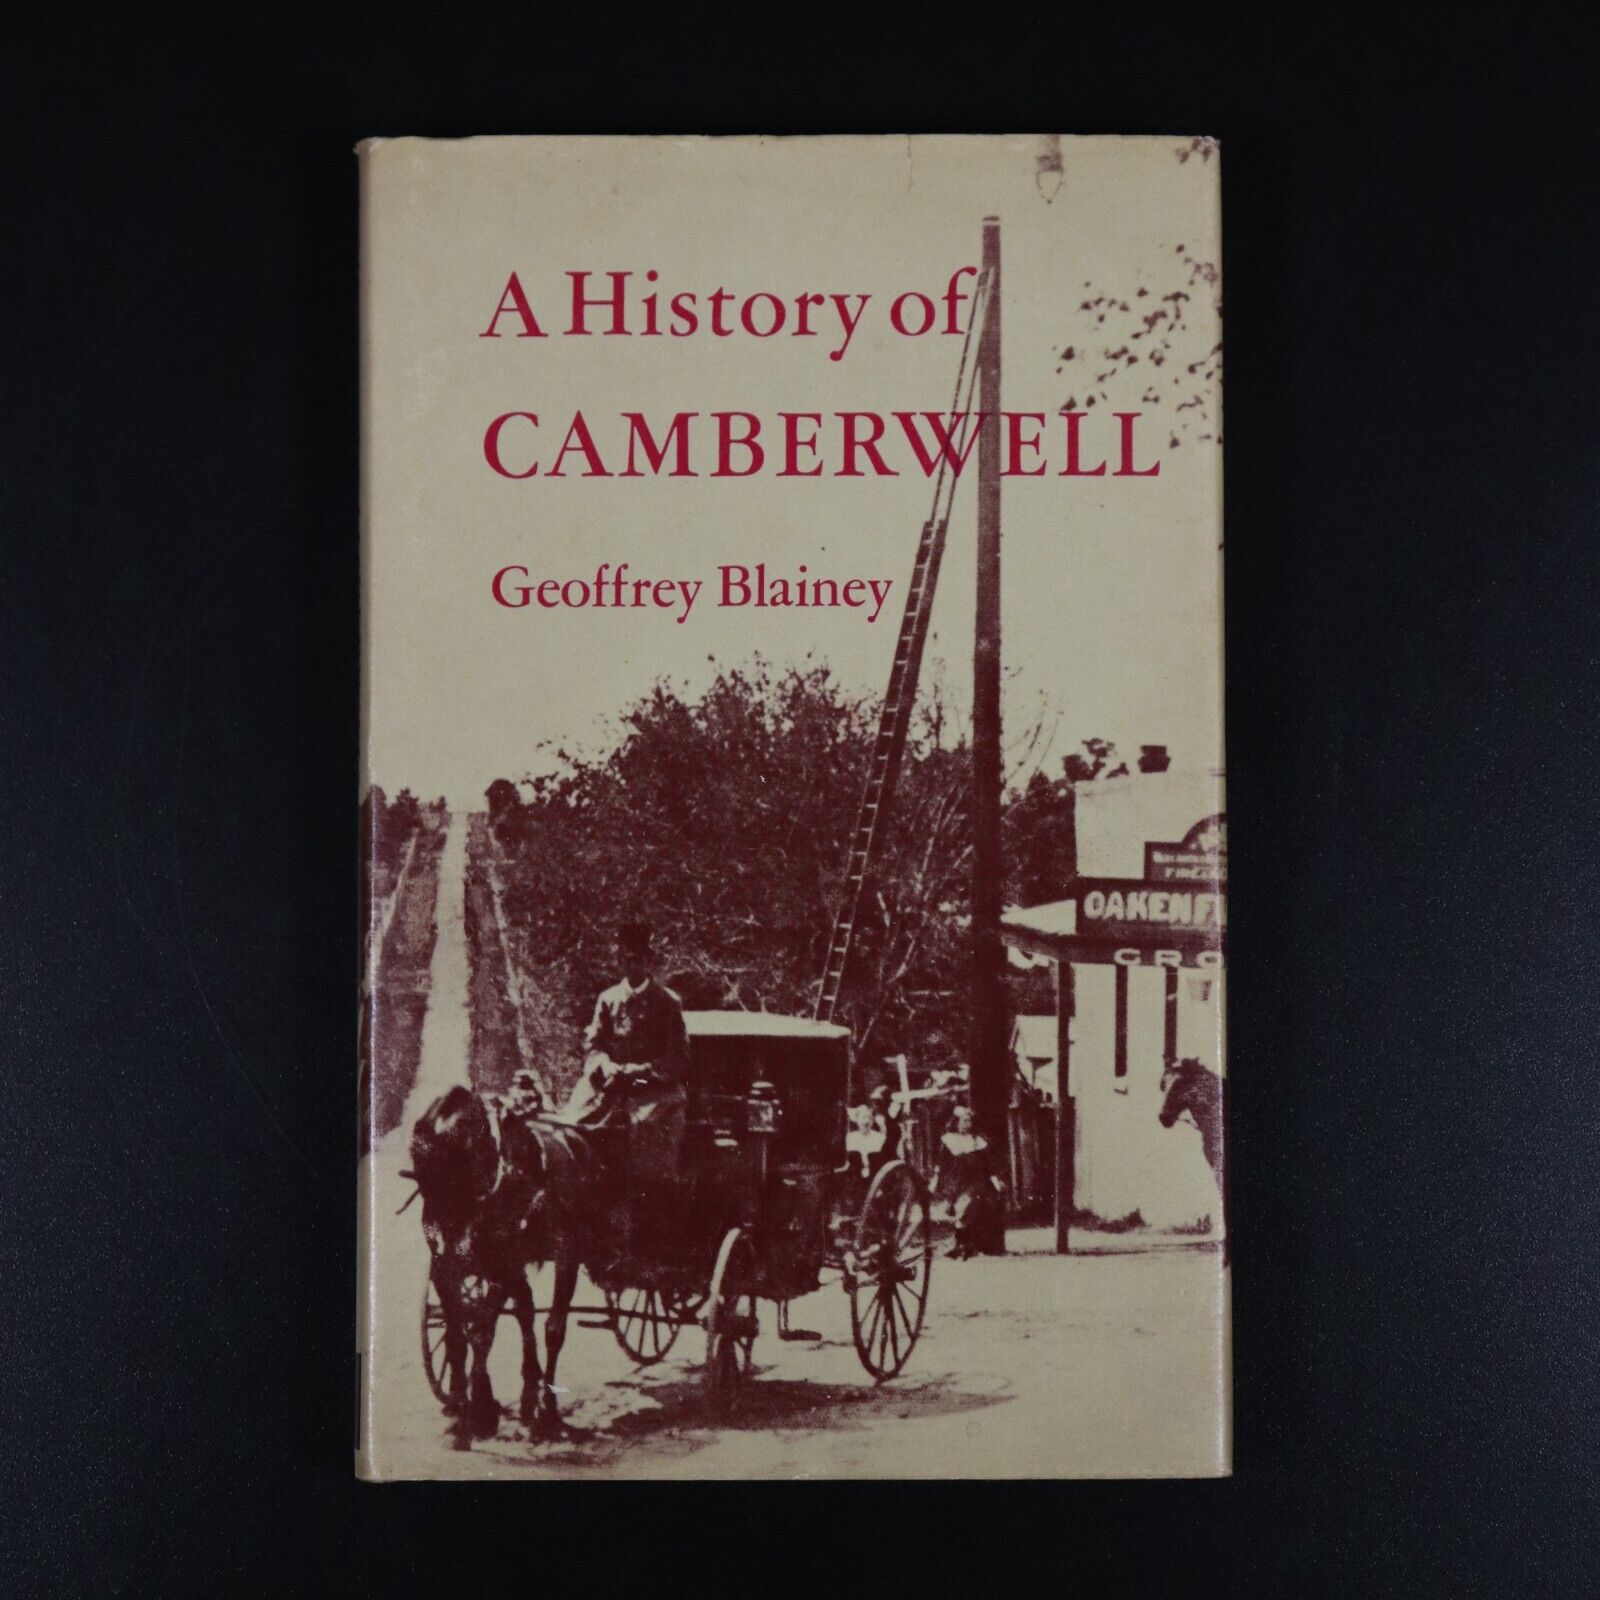 1964 A History Of Camberwell by Geoffrey Blainey Melbourne Local History Book